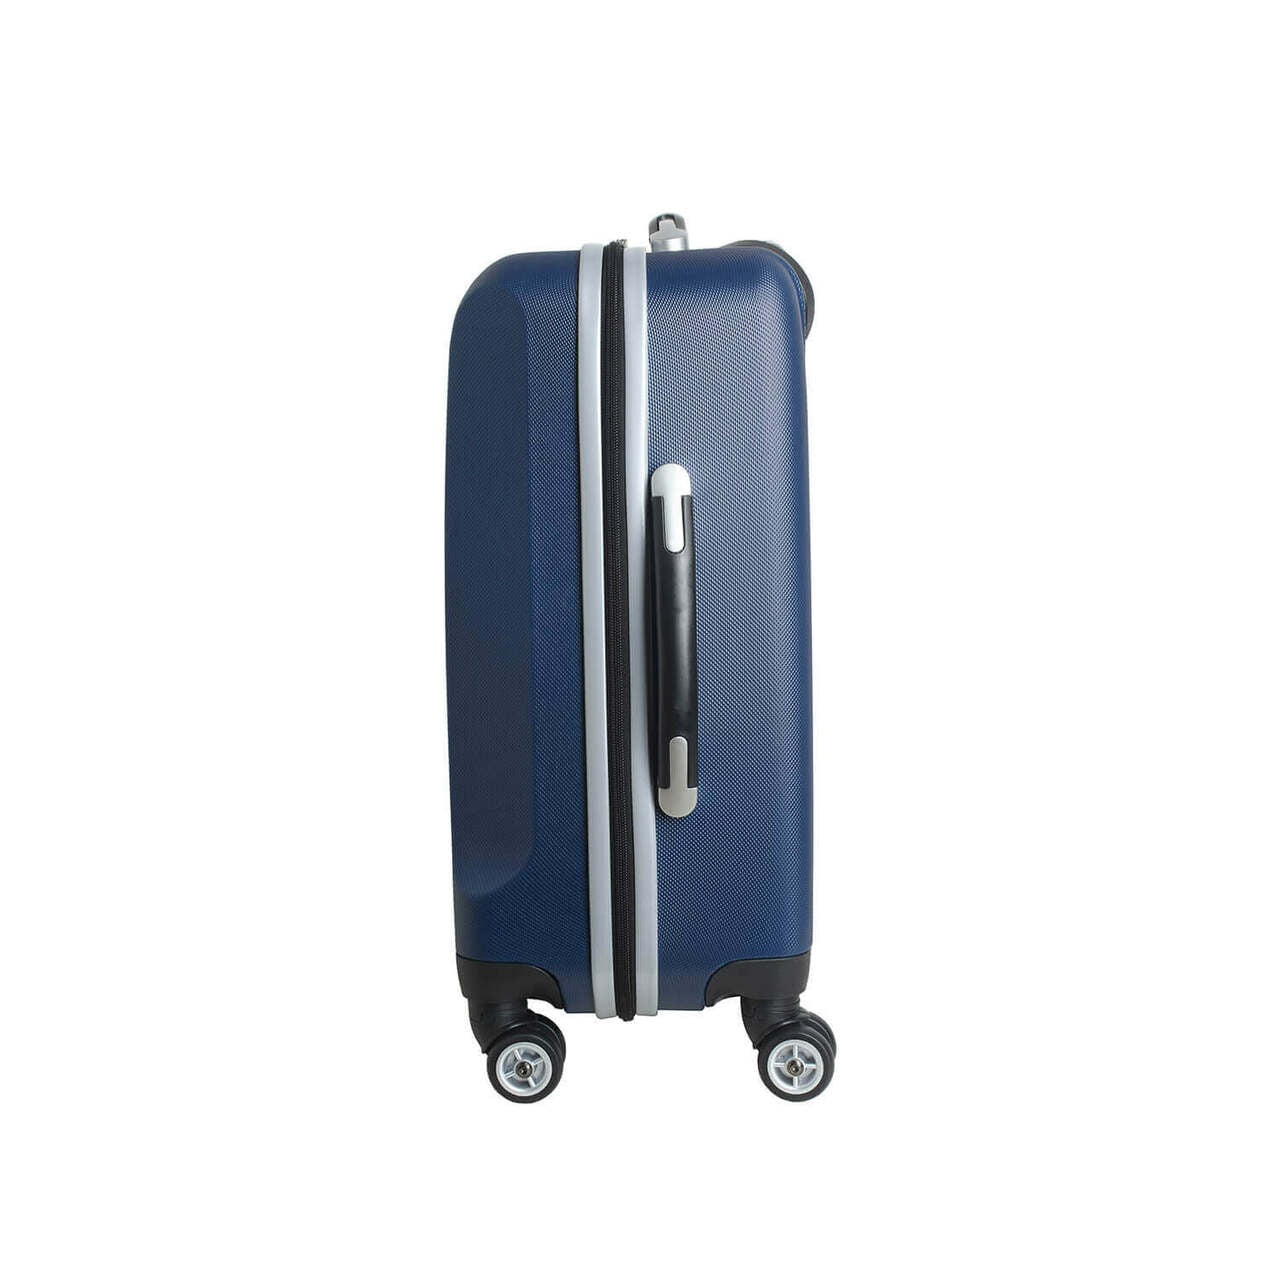 Personalized Initial Name letter "L" 20 inches Carry on Hardcase Spinner Luggage by Mojo in NAVY